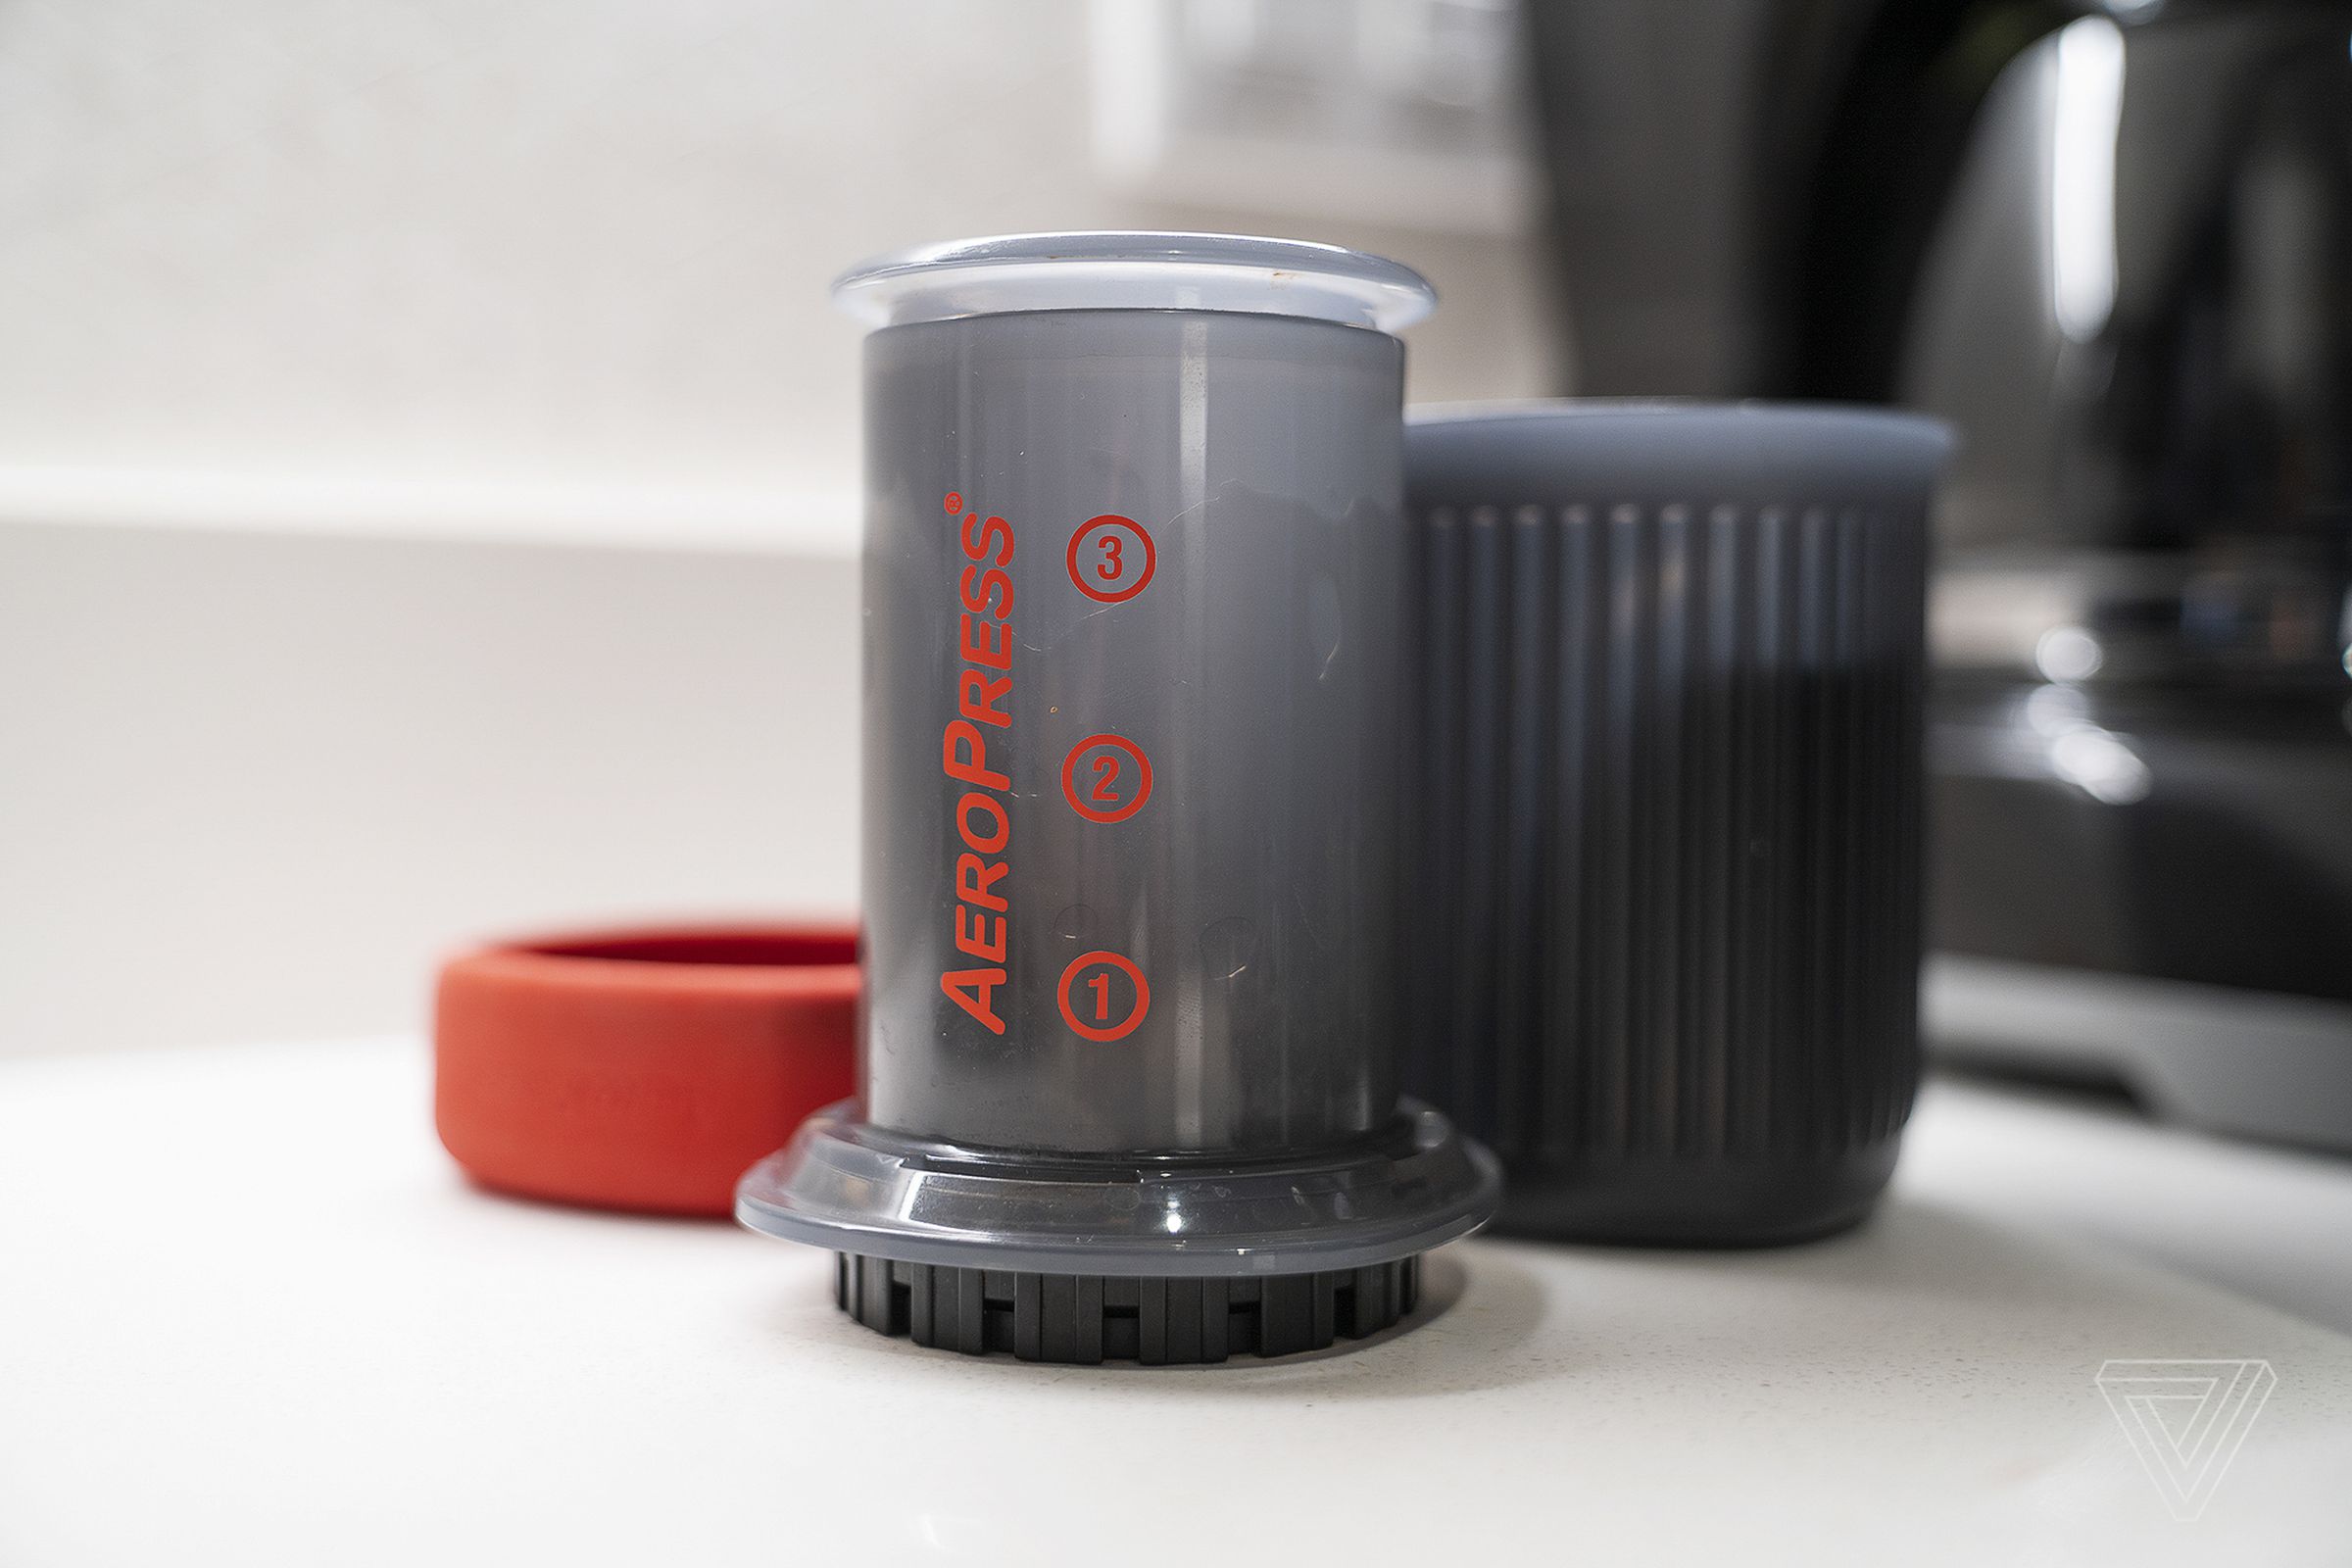 The Aeropress Go makes it very simple to make good coffee in all conditions